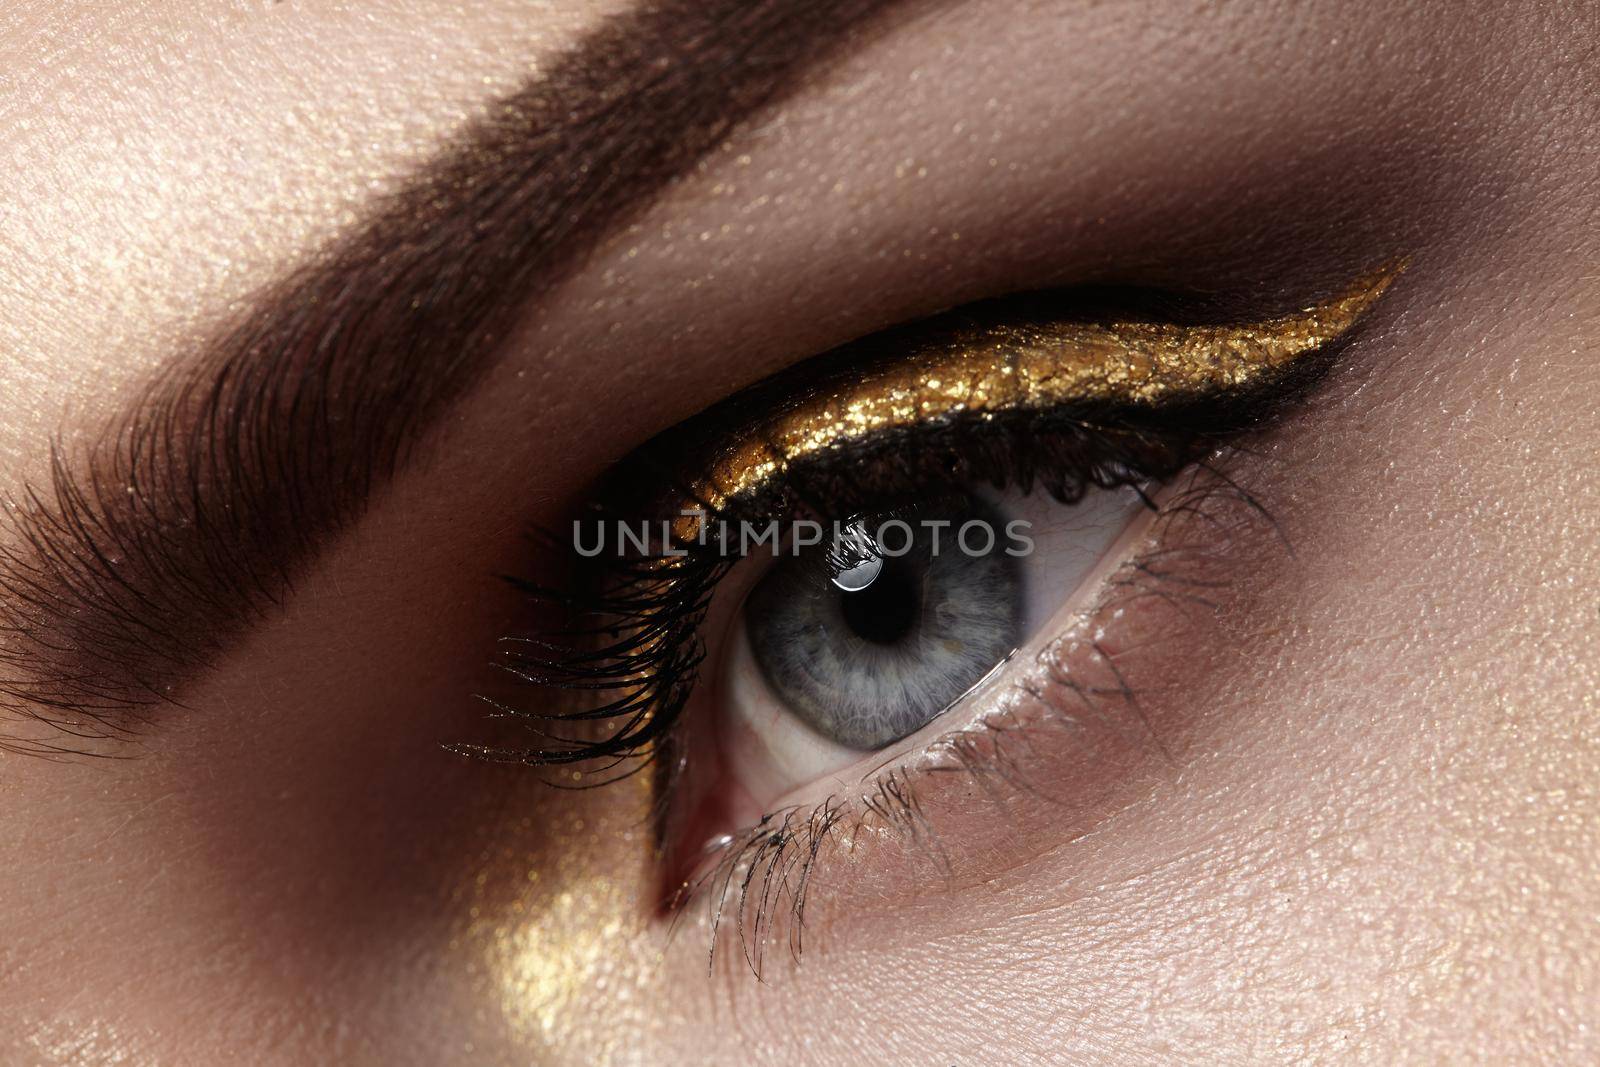 Beautiful macro shot of female eye with ceremonial makeup. Perfect shape of eyebrows, eyeliner and pretty gold line on eyelid. Cosmetics and make-up. Closeup macro shot of fashion sparcle visage